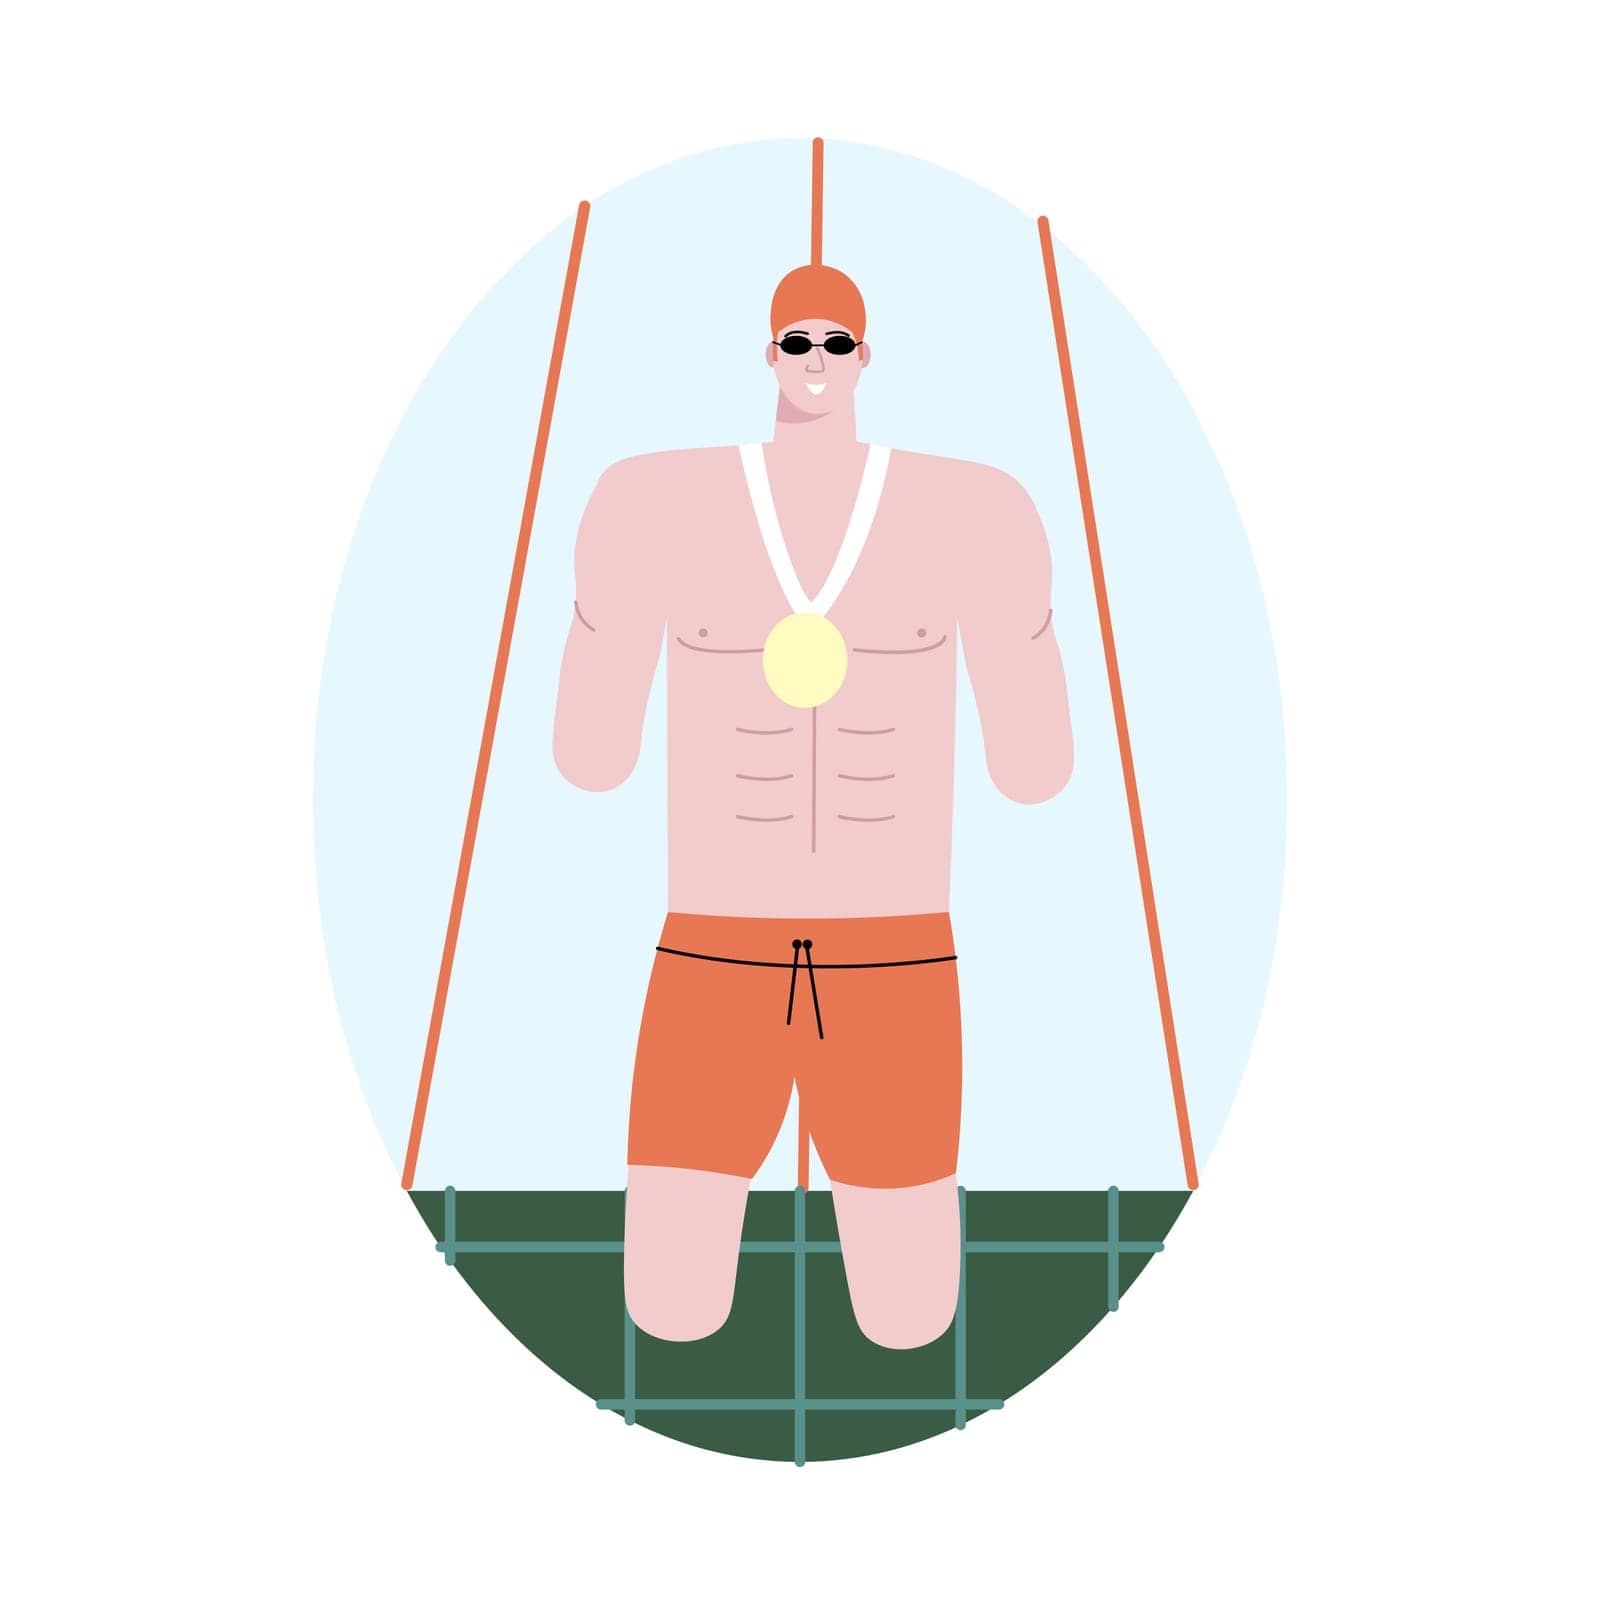 Three december world day of disabled people vector logo design. A man without arms and legs with a medal on his chest stands on the edge of the pool by amnise